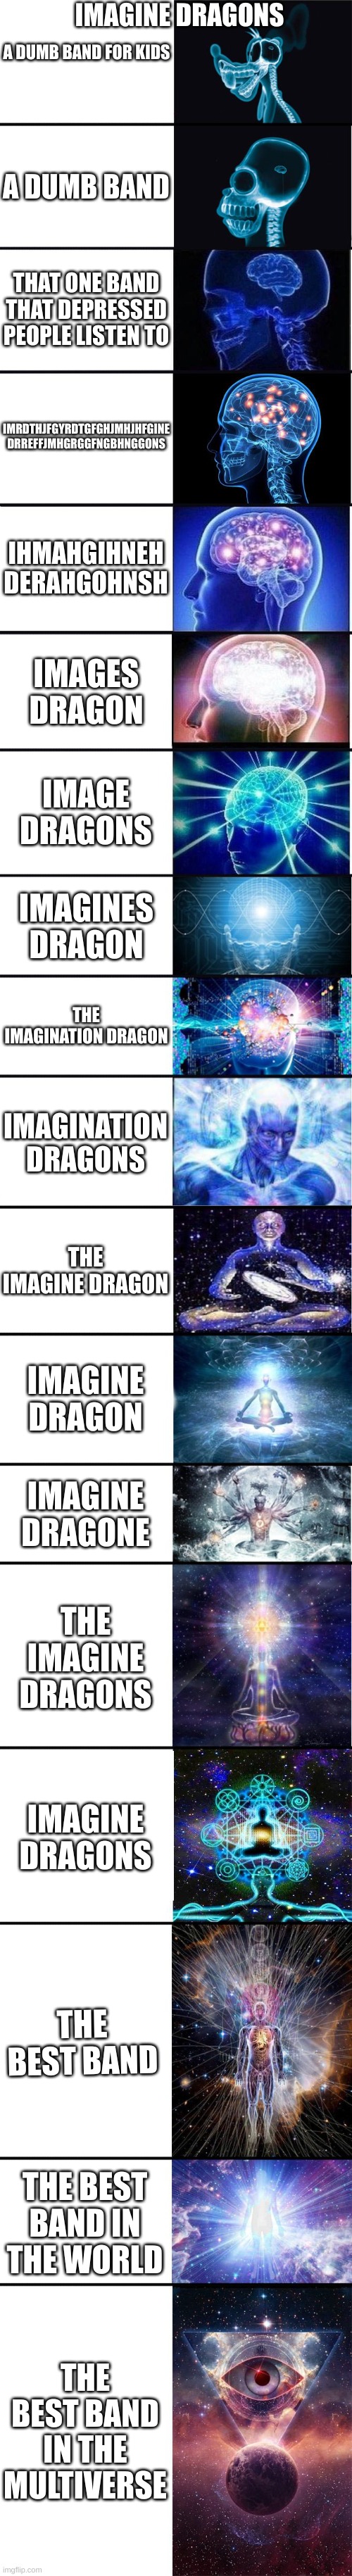 imagine dragons | IMAGINE DRAGONS; A DUMB BAND FOR KIDS; A DUMB BAND; THAT ONE BAND THAT DEPRESSED PEOPLE LISTEN TO; IMRDTHJFGYRDTGFGHJMHJHFGINE DRREFFJMHGRGGFNGBHNGGONS; IHMAHGIHNEH DERAHGOHNSH; IMAGES DRAGON; IMAGE DRAGONS; IMAGINES DRAGON; THE IMAGINATION DRAGON; IMAGINATION DRAGONS; THE IMAGINE DRAGON; IMAGINE DRAGON; IMAGINE DRAGONE; THE IMAGINE DRAGONS; IMAGINE DRAGONS; THE BEST BAND; THE BEST BAND IN THE WORLD; THE BEST BAND IN THE MULTIVERSE | image tagged in expanding brain 9001,imagine dragons,why are you reading the tags | made w/ Imgflip meme maker